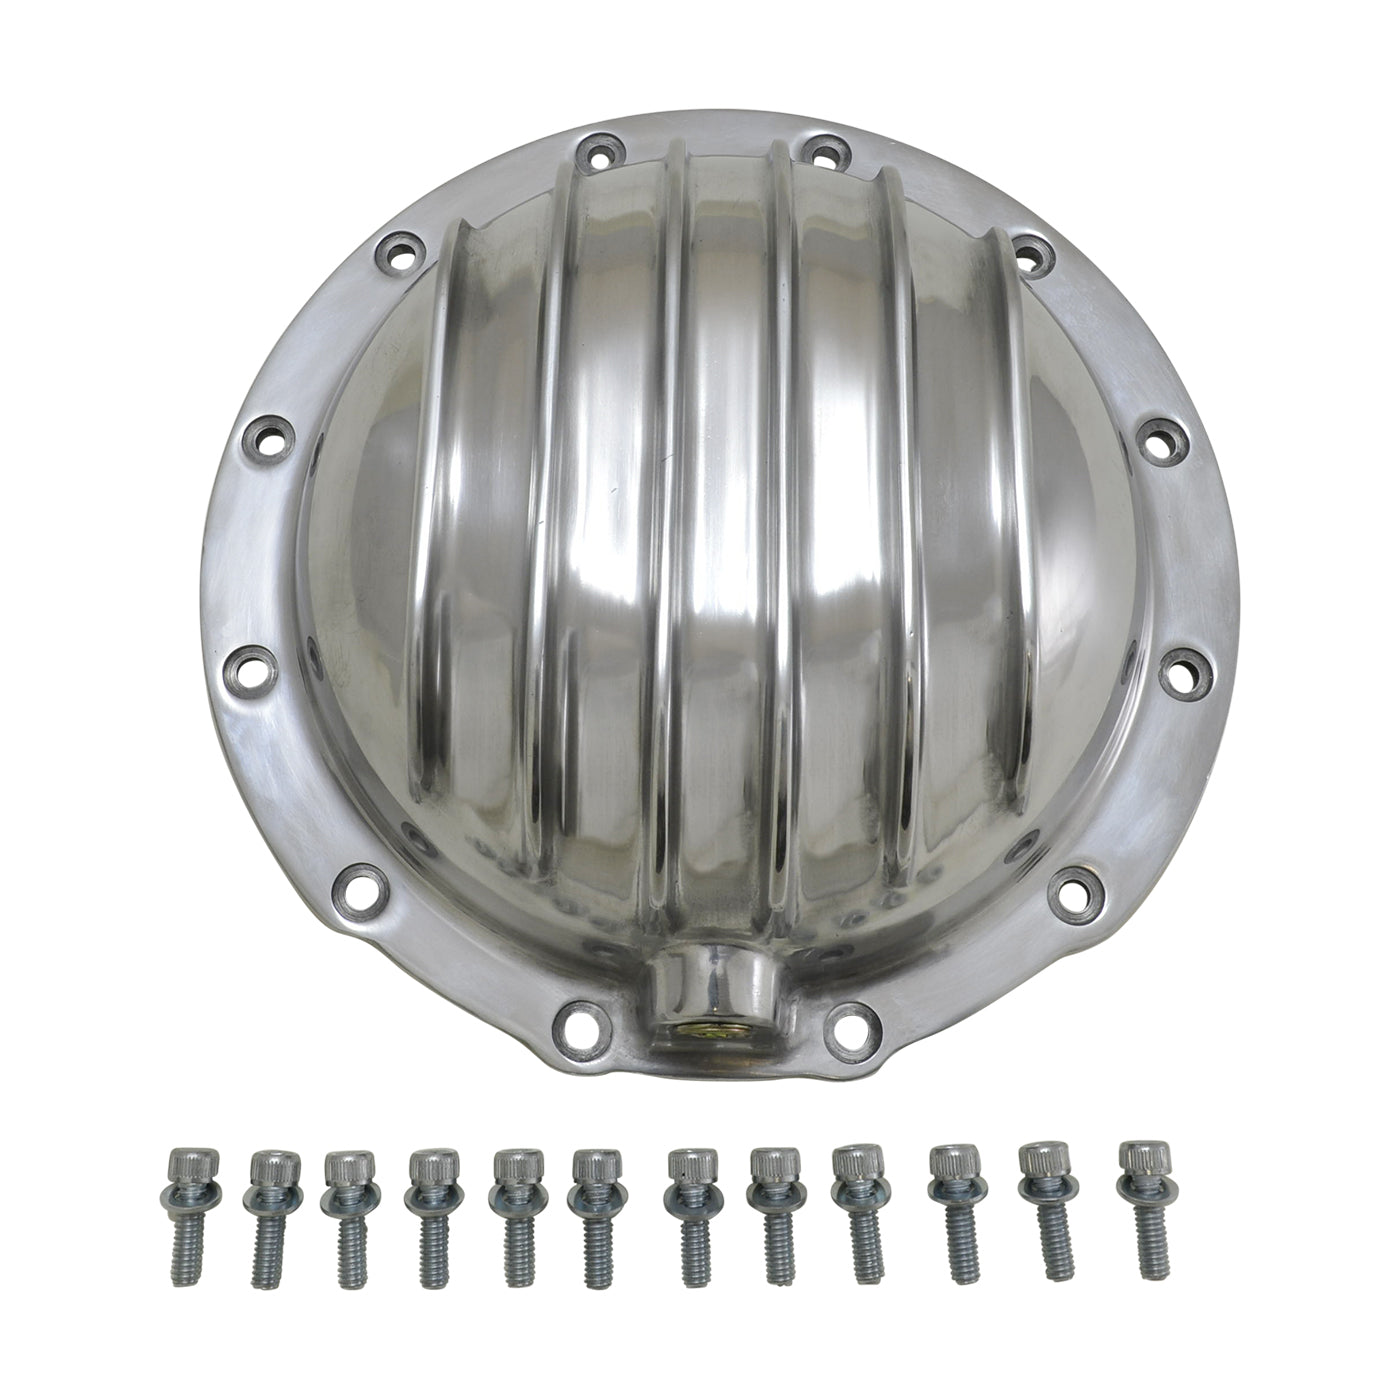 Yukon Gear American Motors Hummer Jeep (4WD/RWD) Differential Cover YPC2-M20